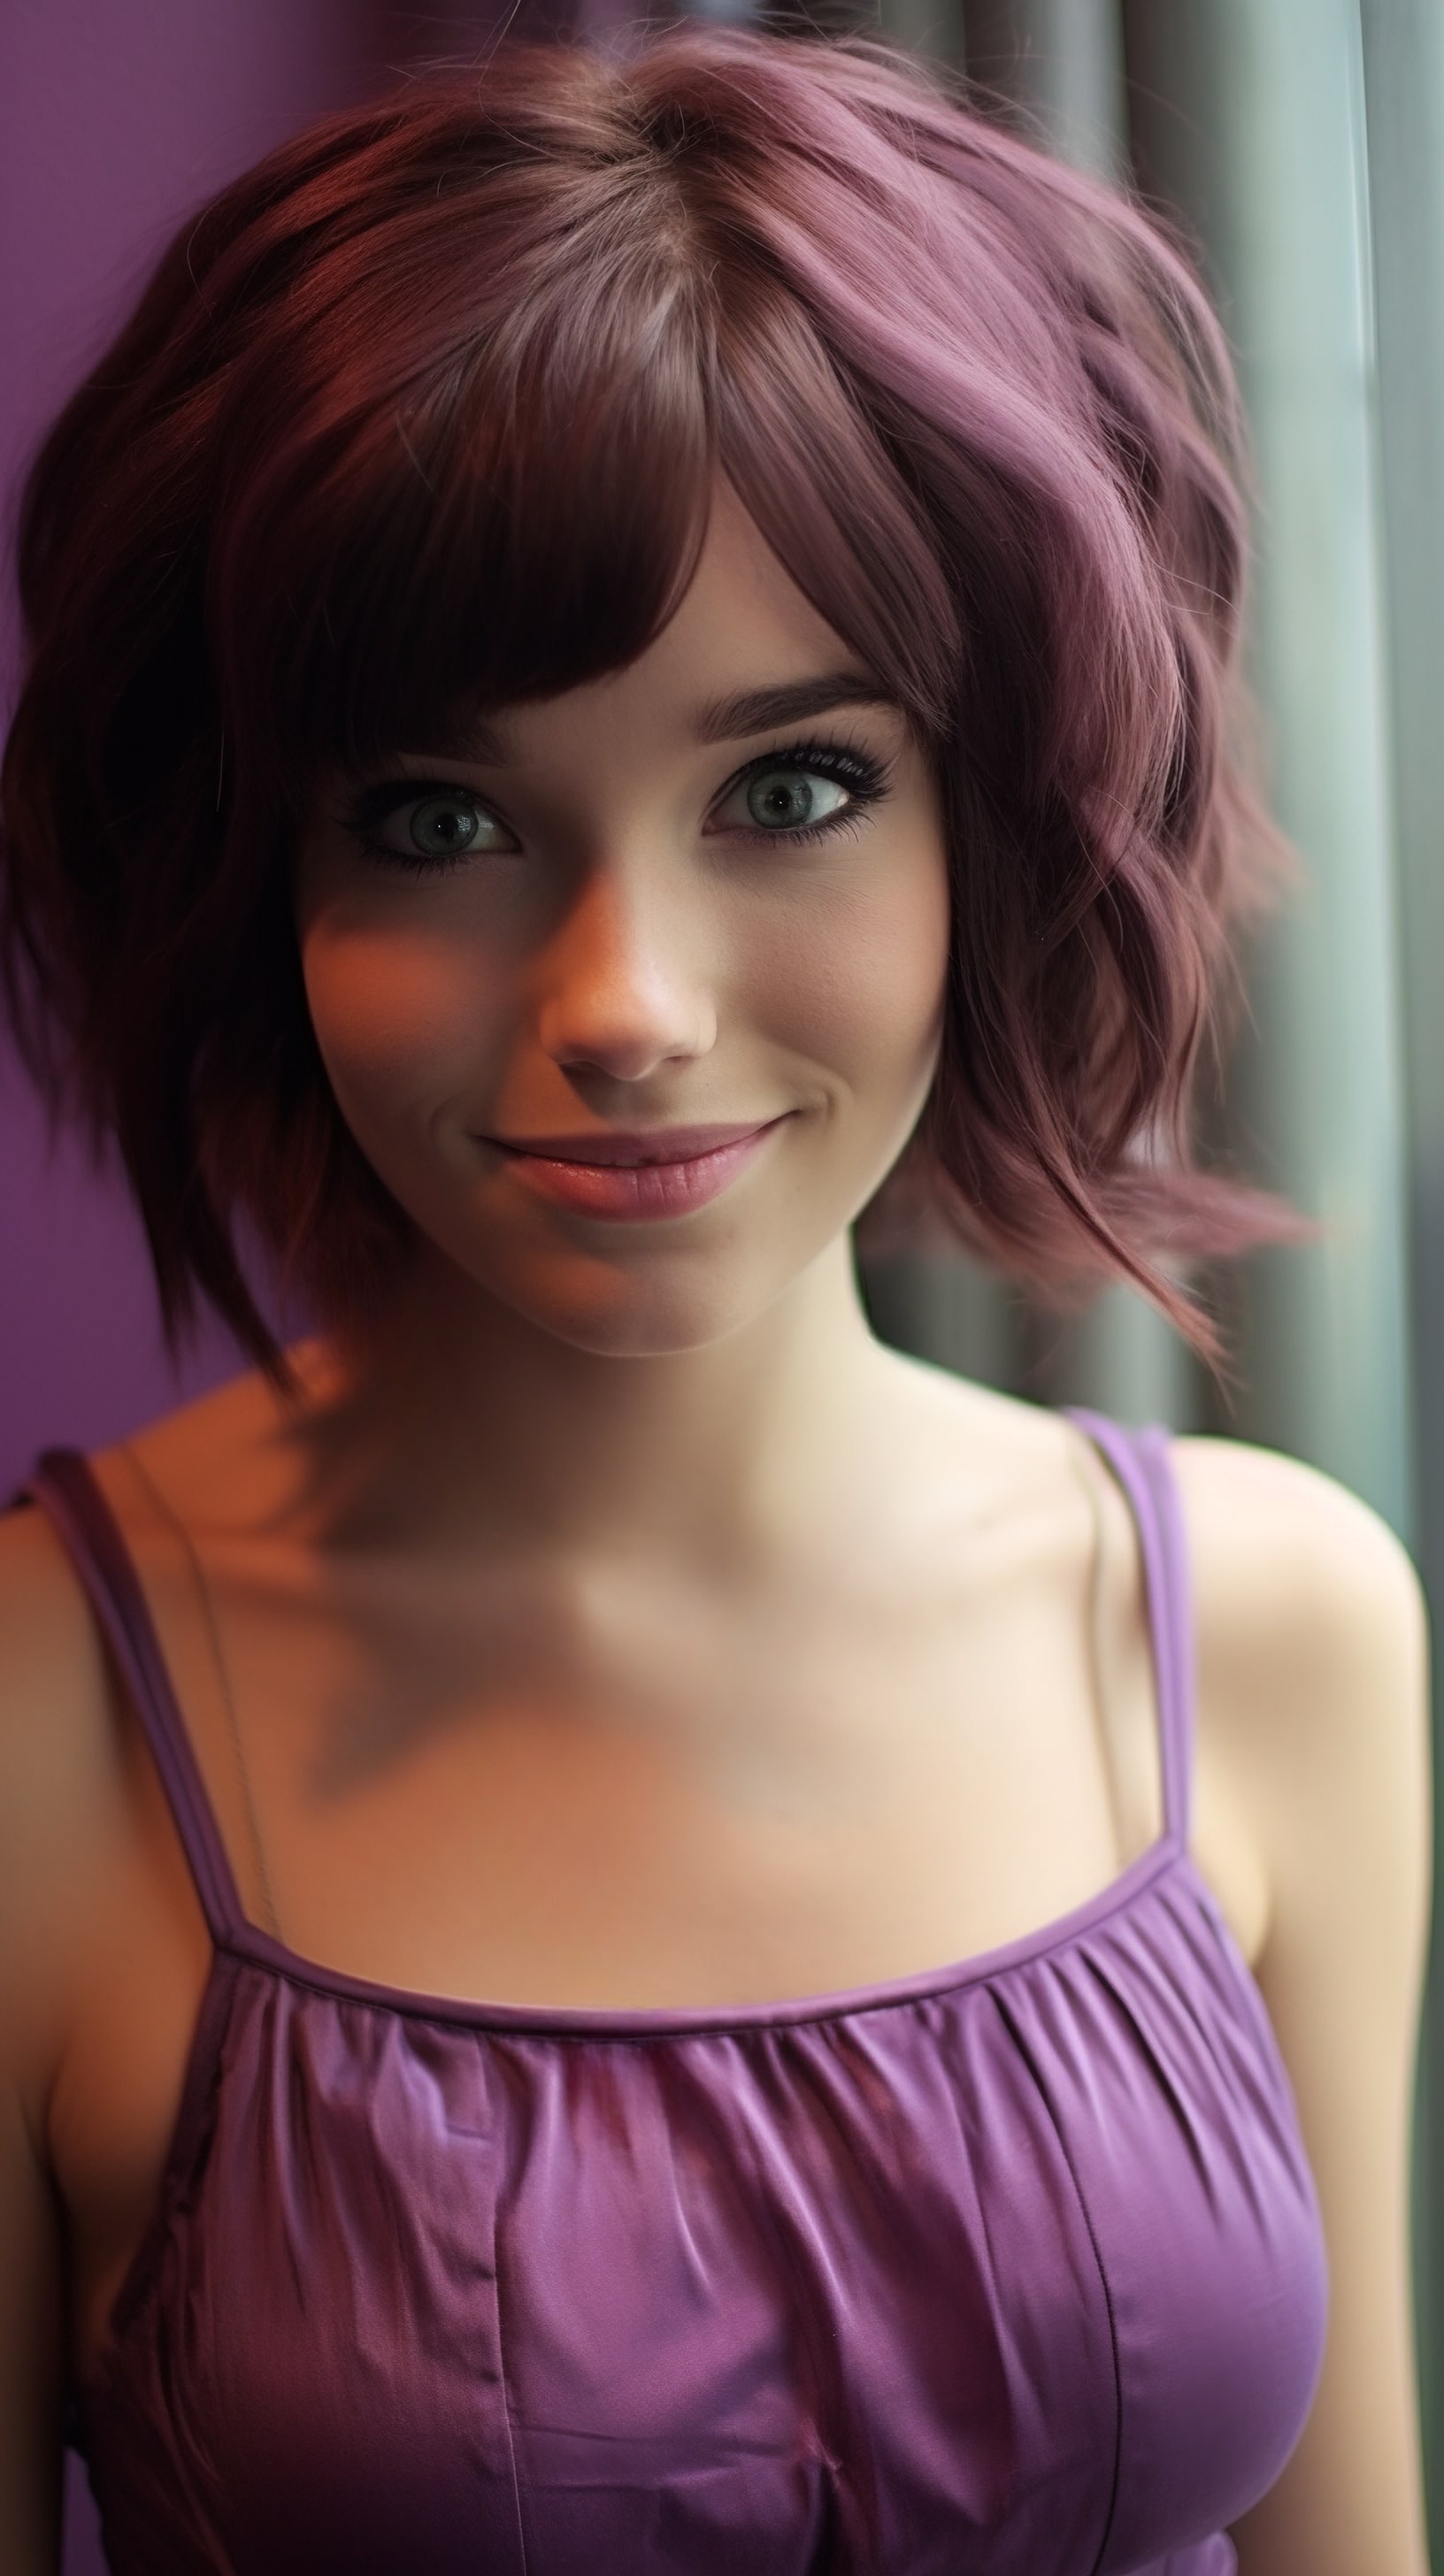 Girl with short dark colored hair in purple dress